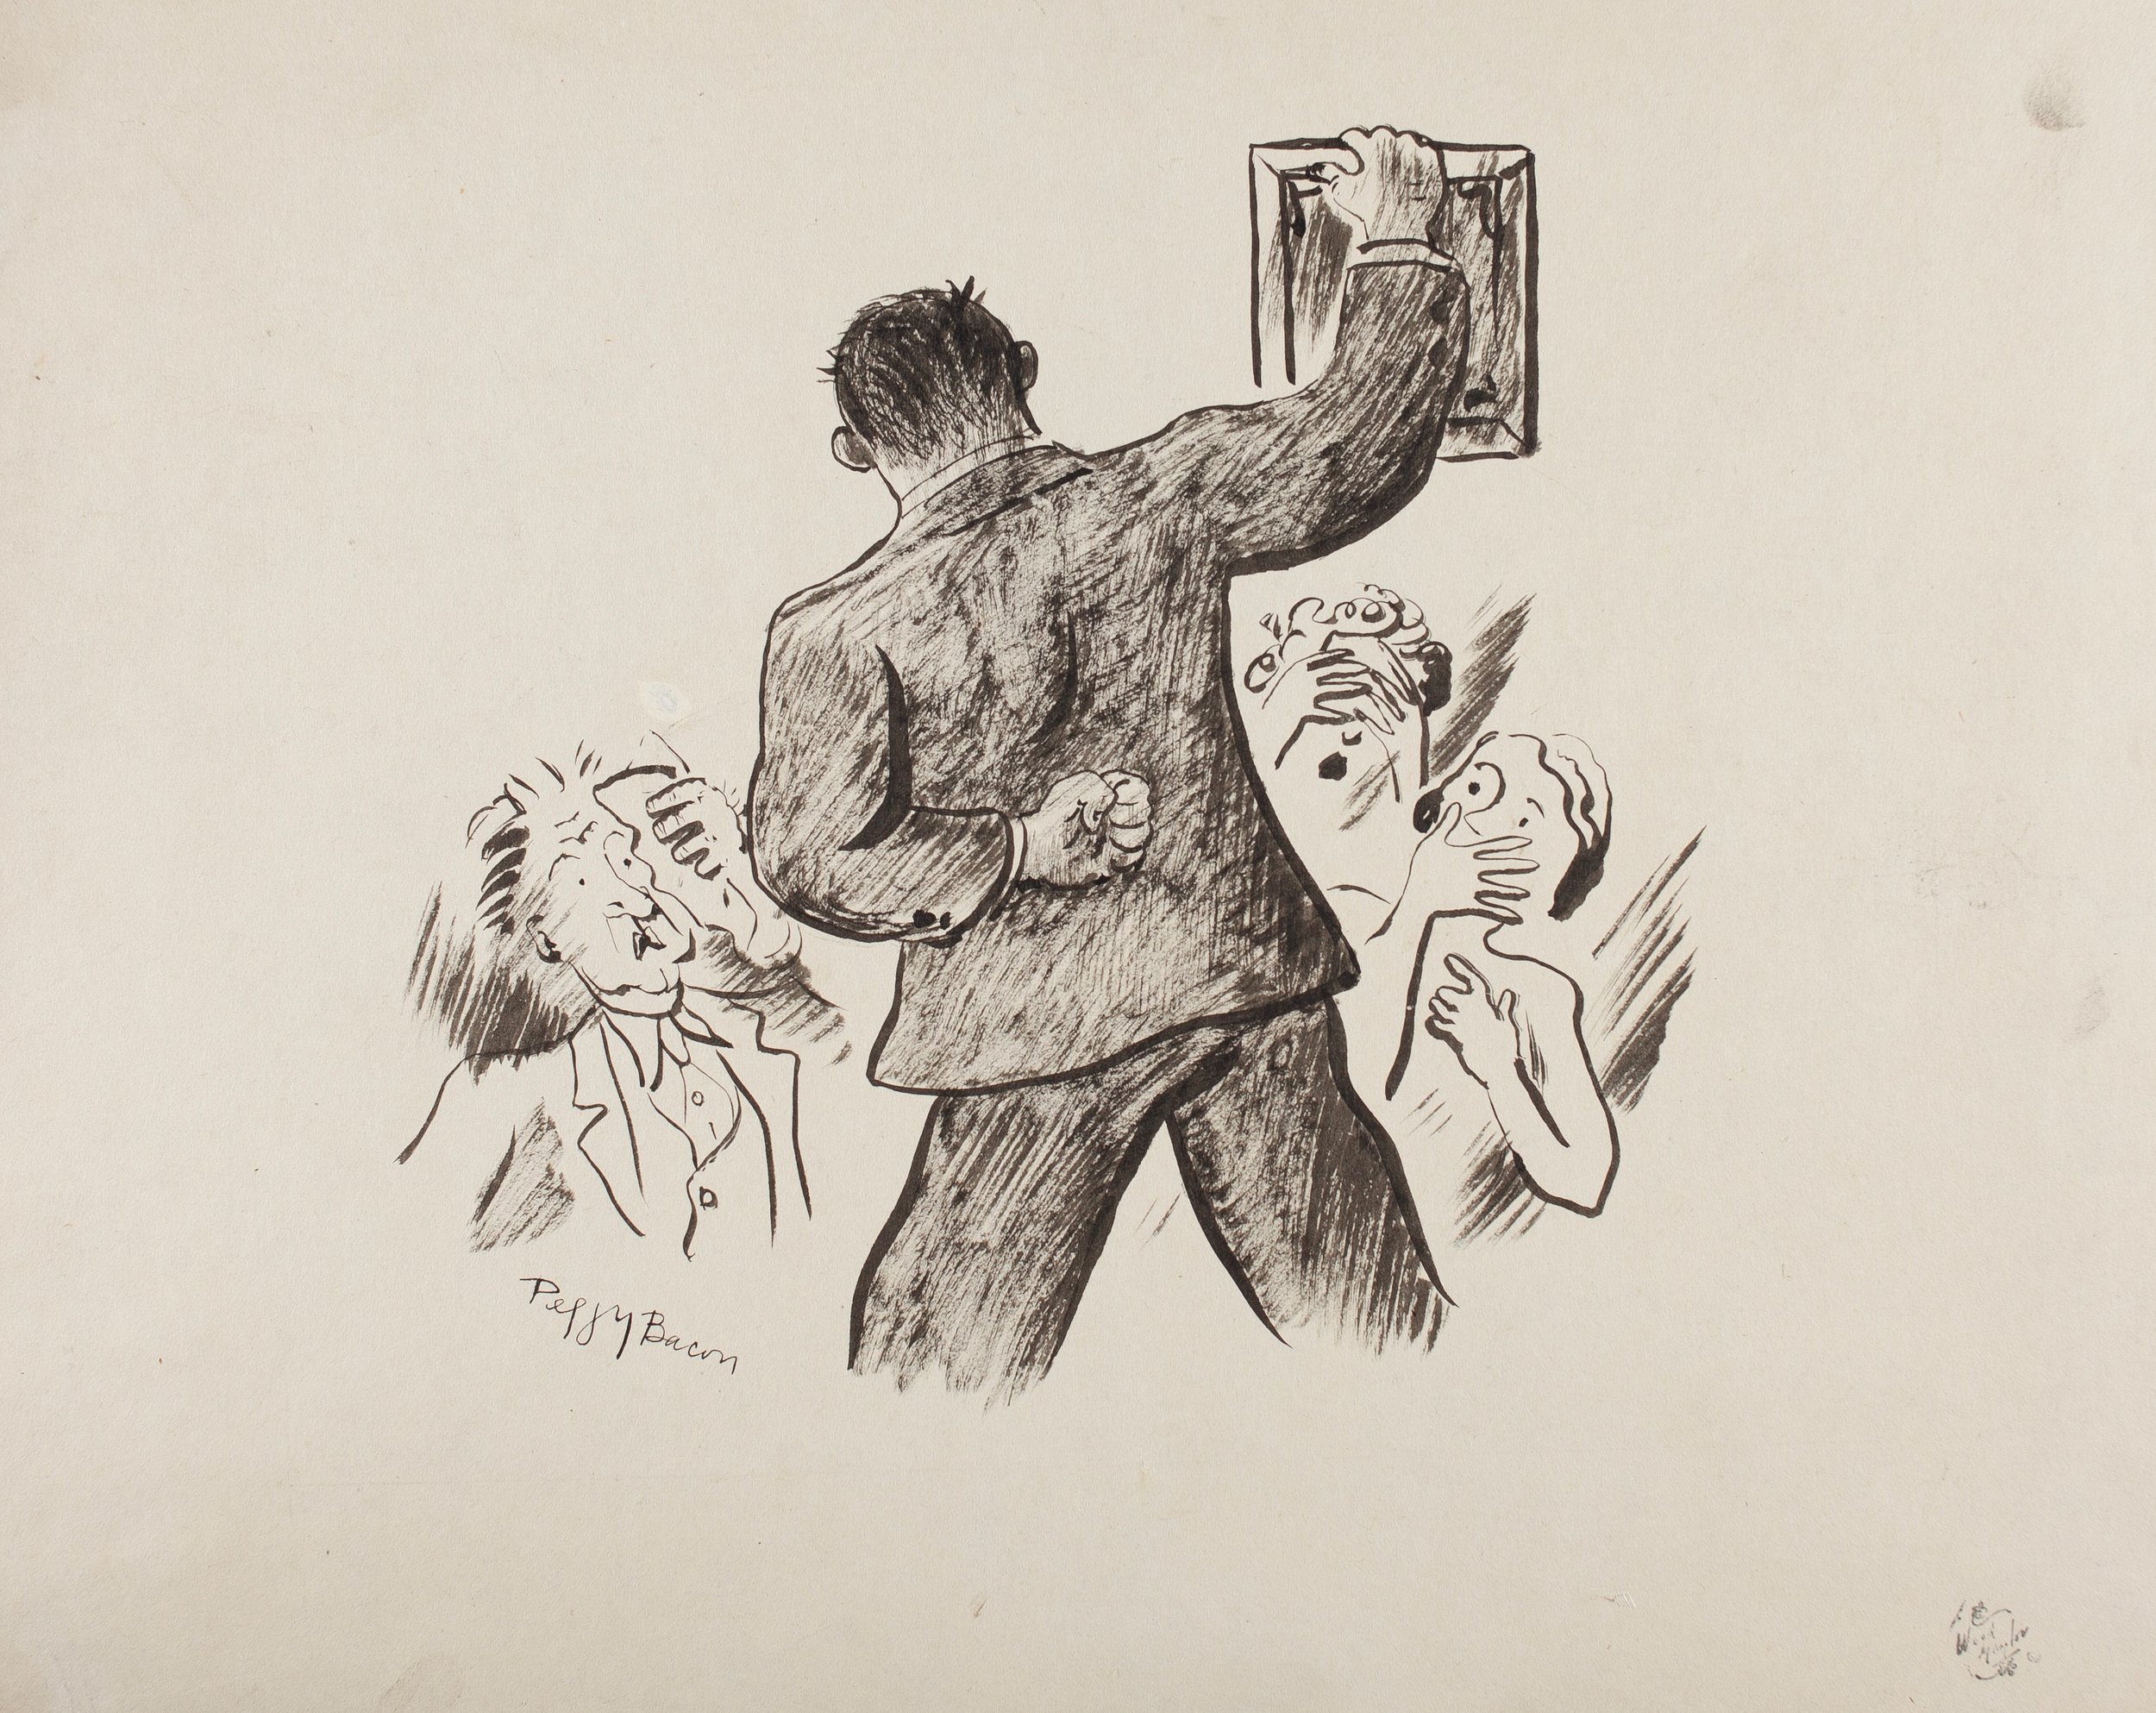  Peggy Bacon (United States, 1895–1987),  Auction Notice , 1931, ink on wove paper, 7 1/2 x 8 3/4 inches. Museum purchase with support from Mary-Leigh Call Smart, 1981.1089 